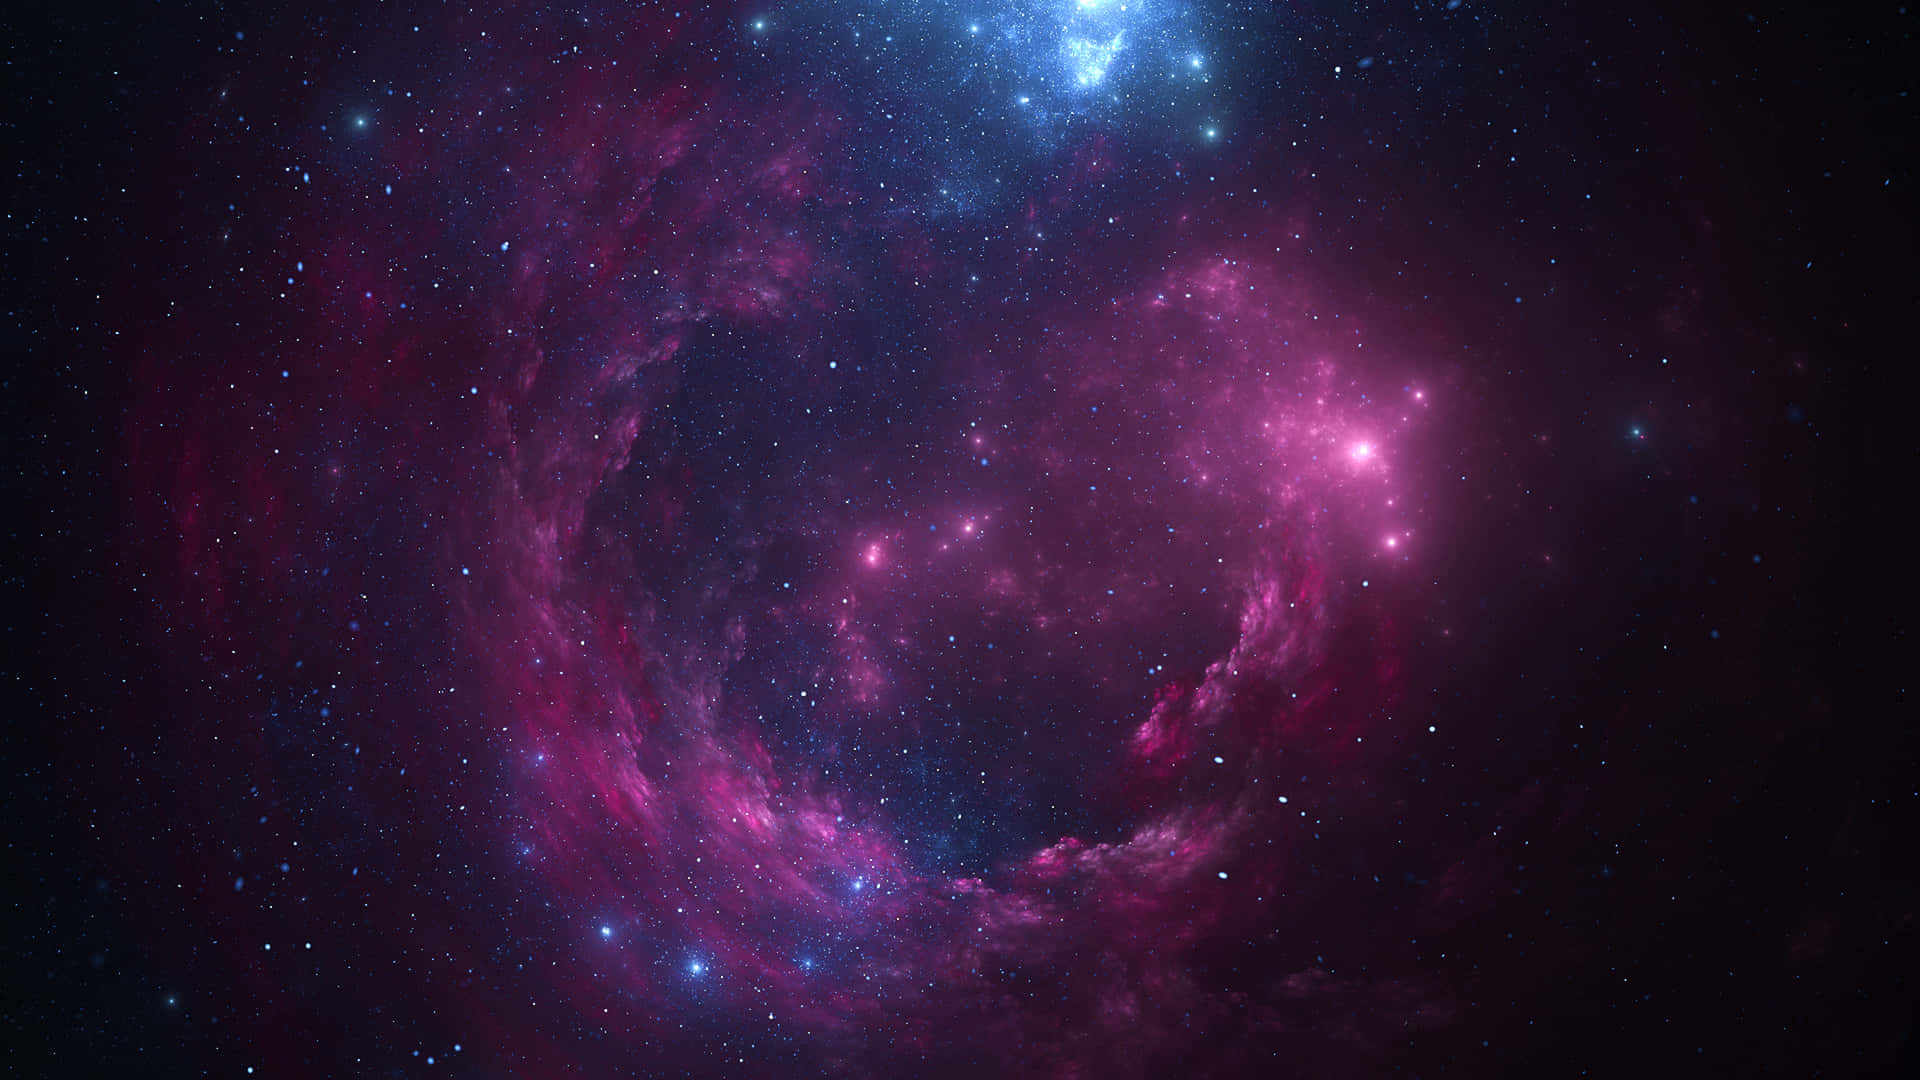 Explore the stunning depths of space with 4K resolution quality